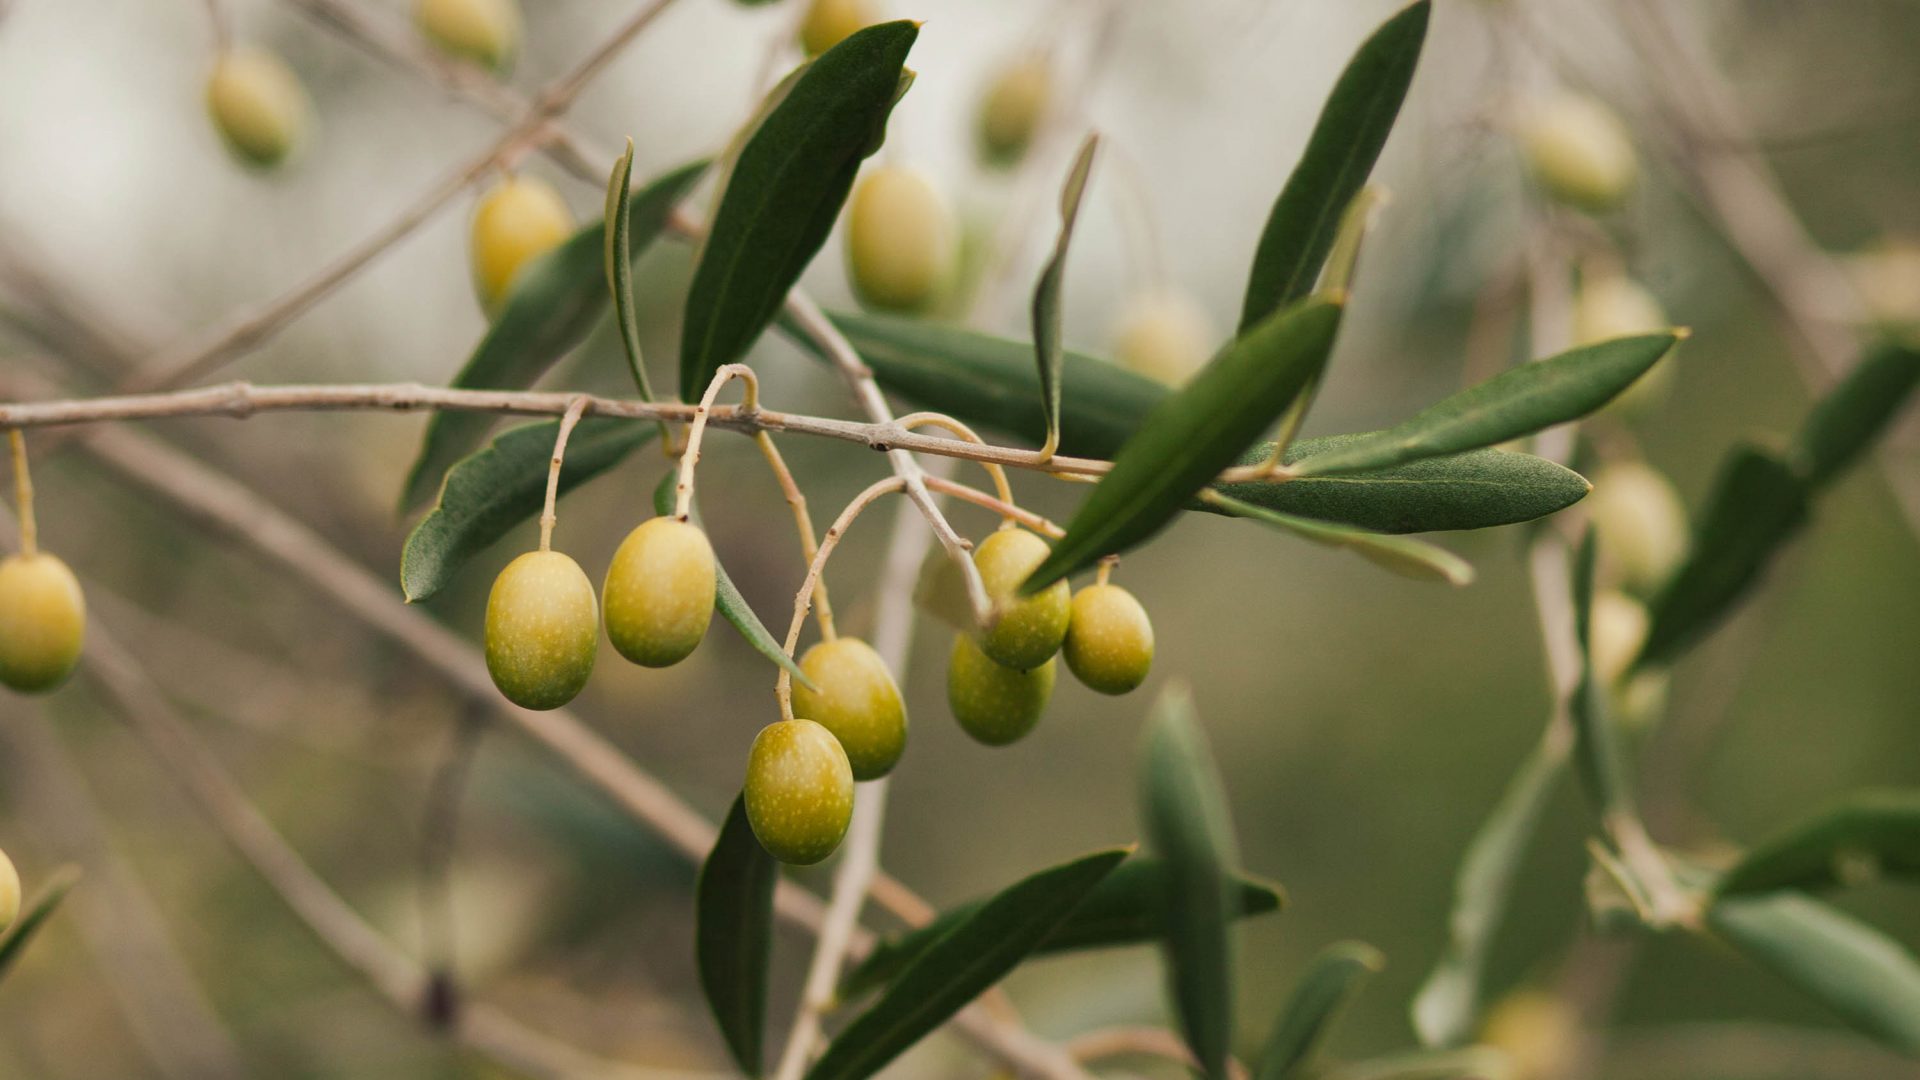 A branch covered in green olives.